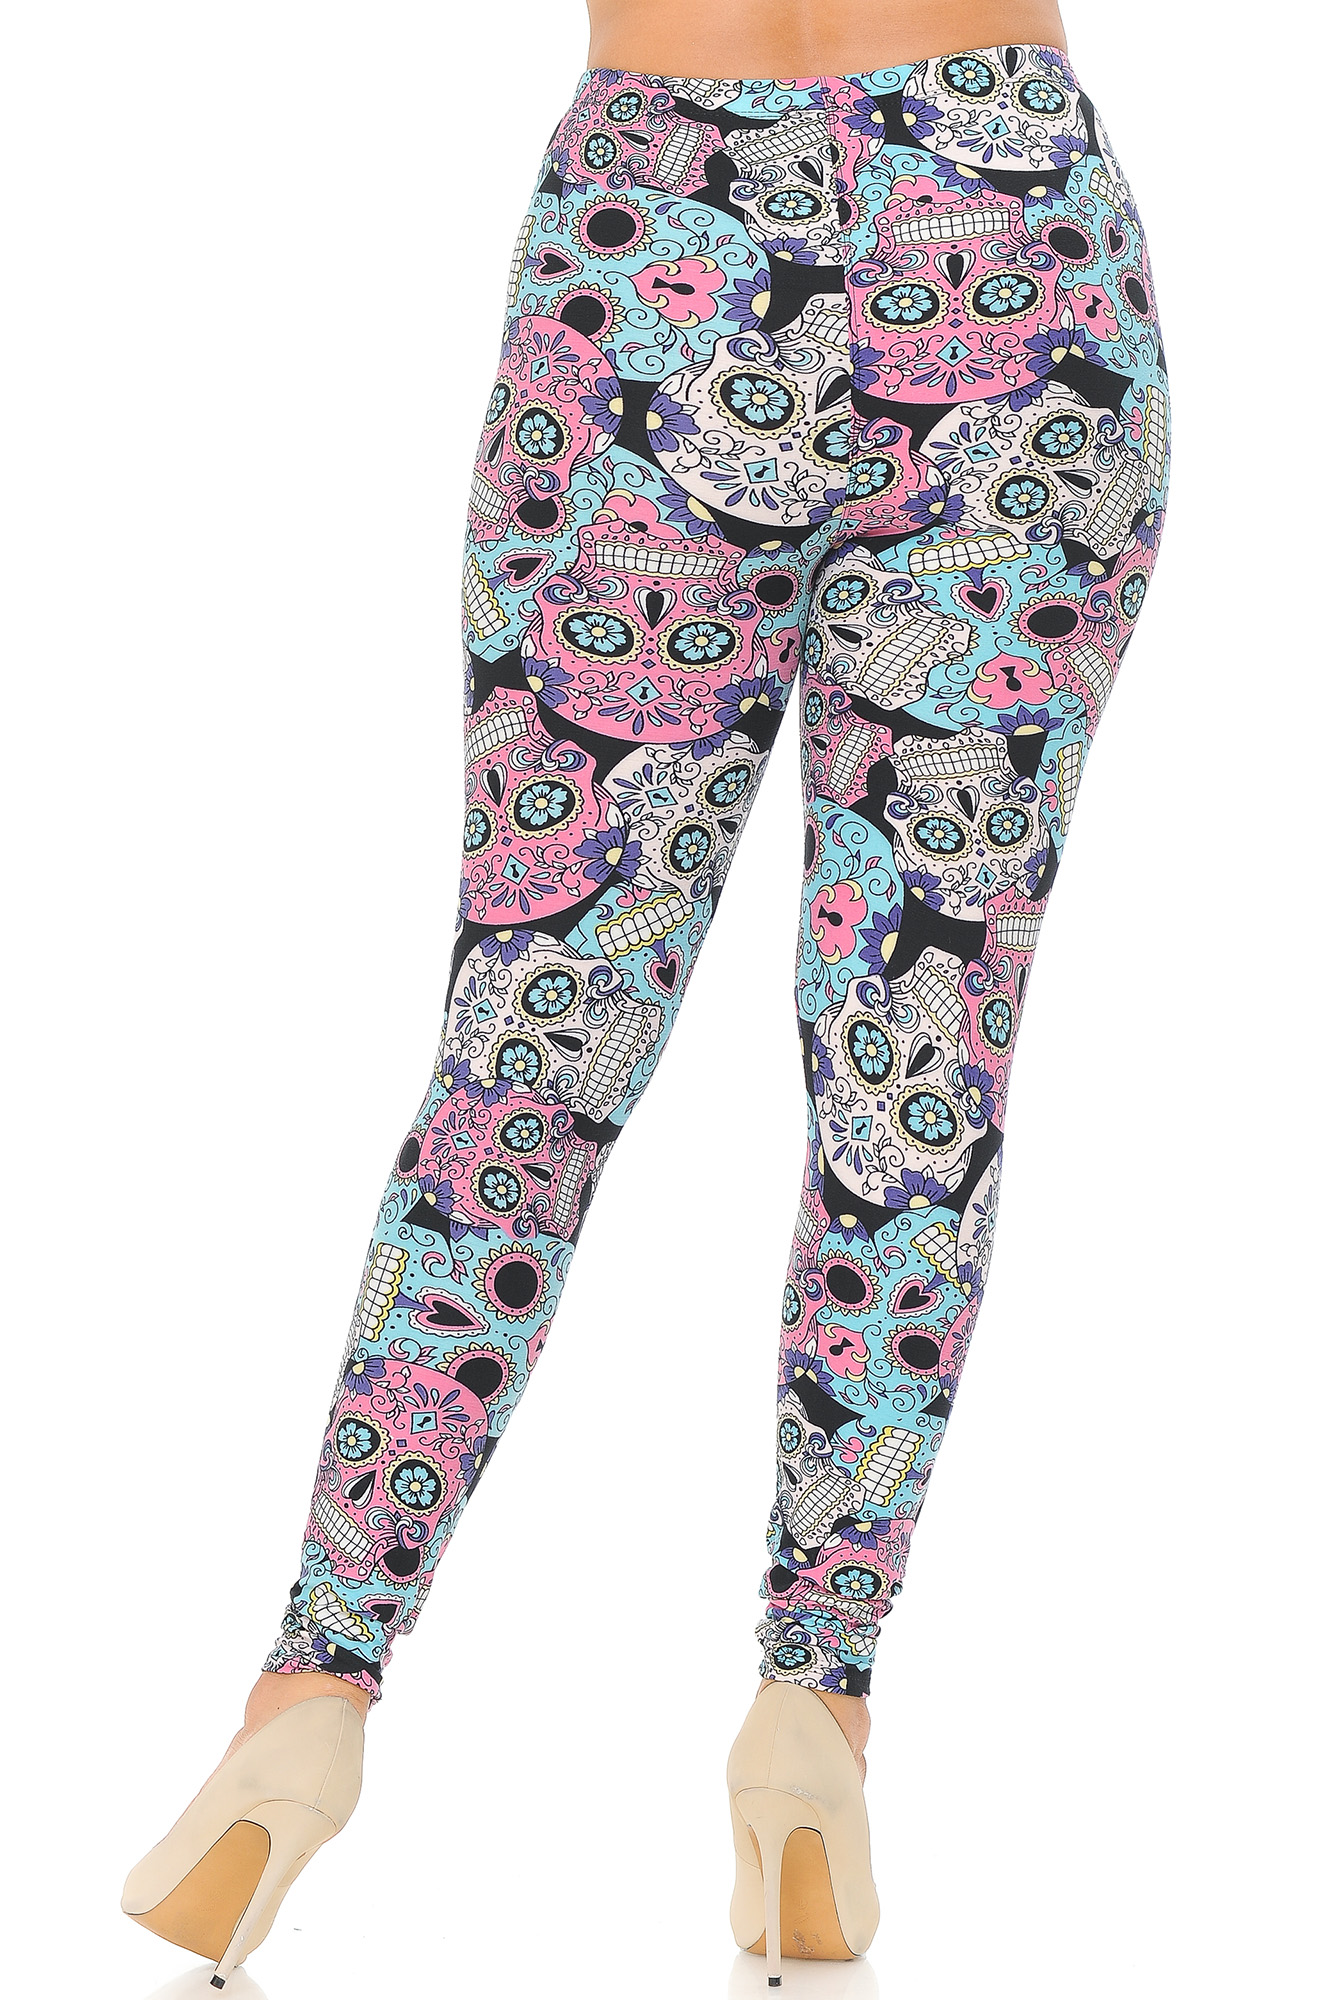 Wholesale Buttery Smooth Pastel Sugar Skull Extra Plus Size Leggings - 3X-5X